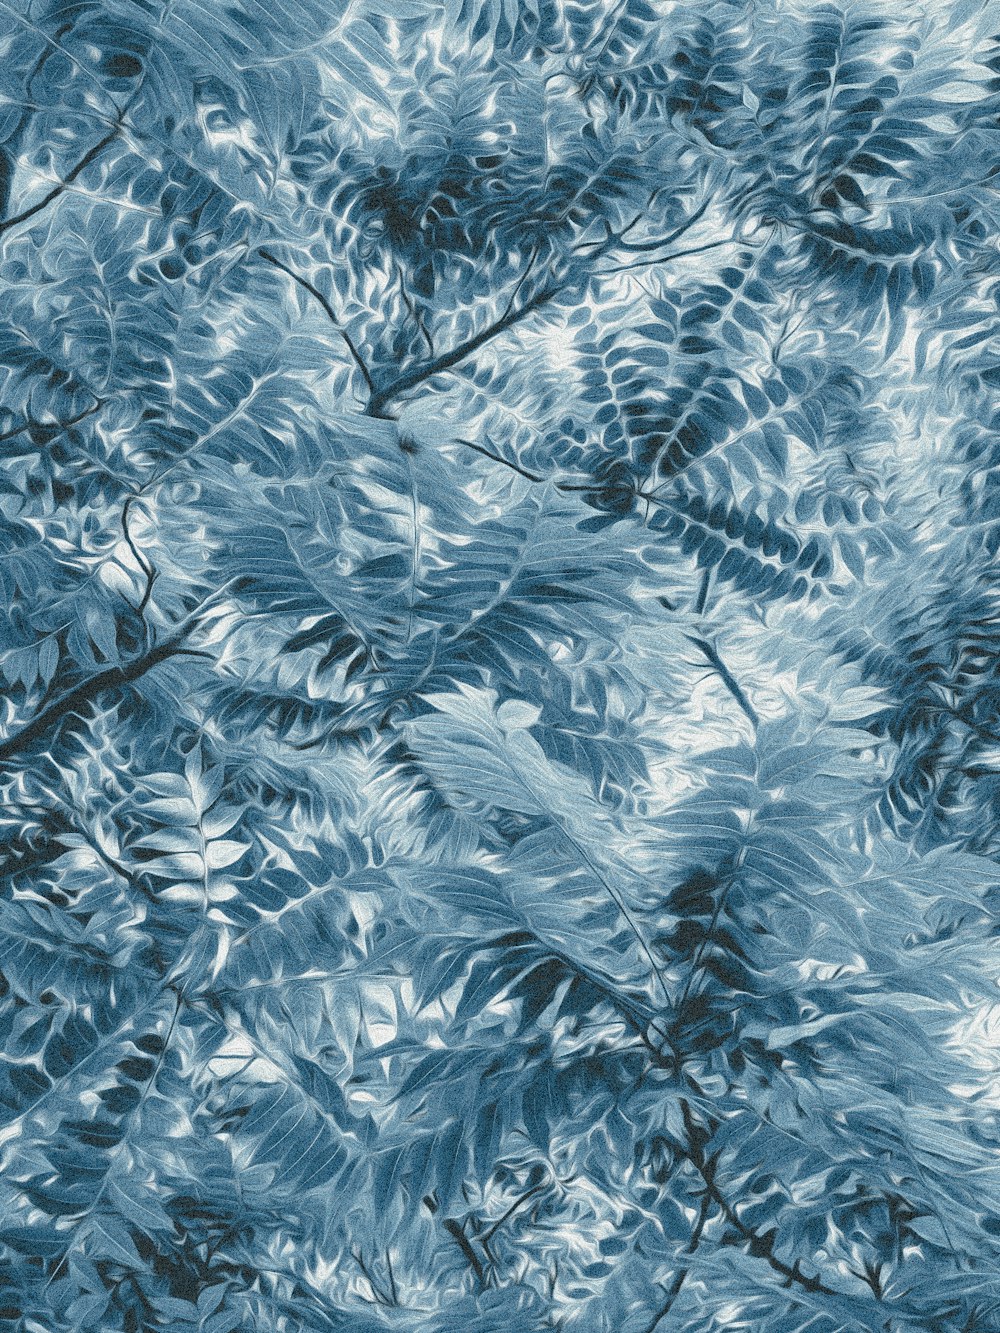 a picture of a tree with blue leaves